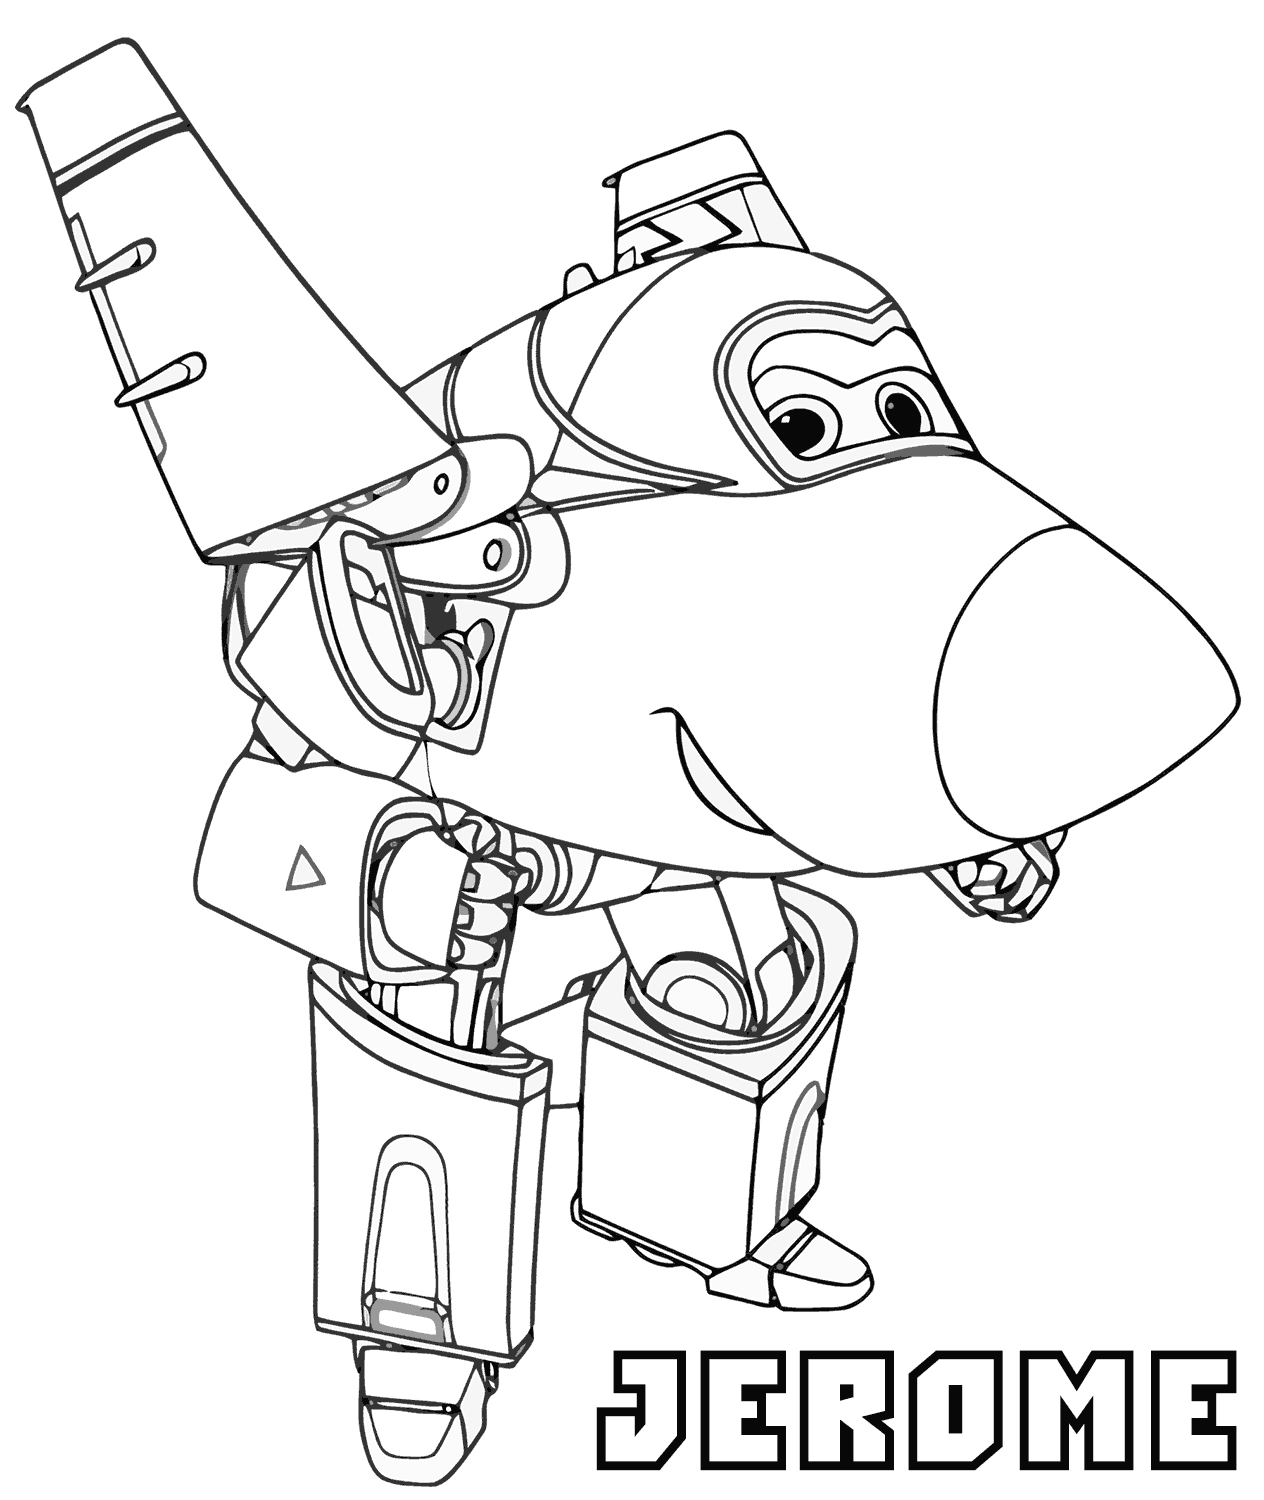 Super Wings coloring pages | Coloring pages to download and print